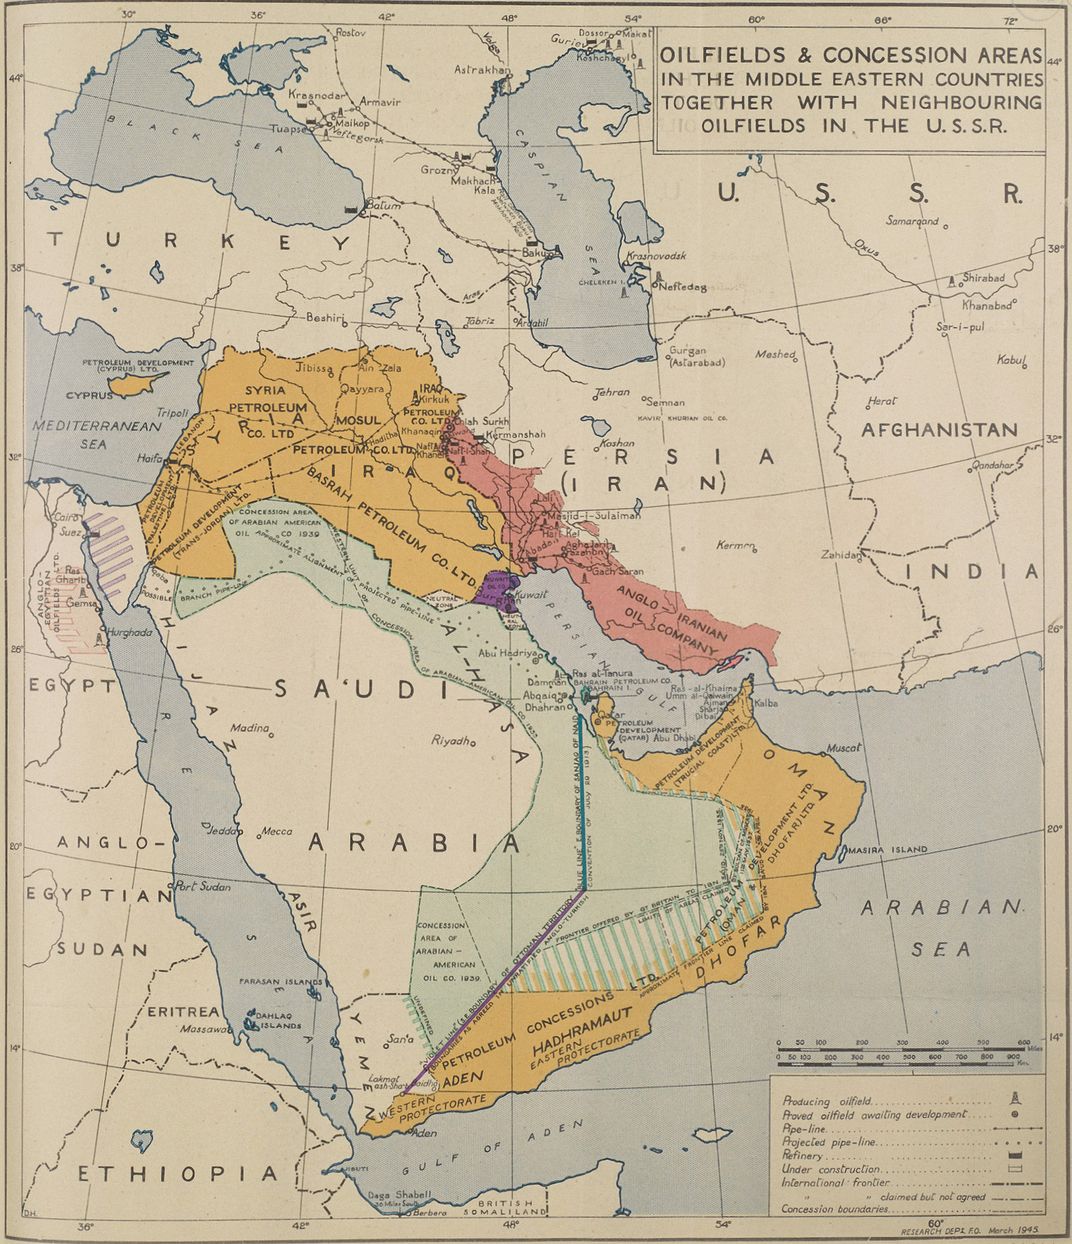 1945 map of Middle East oil